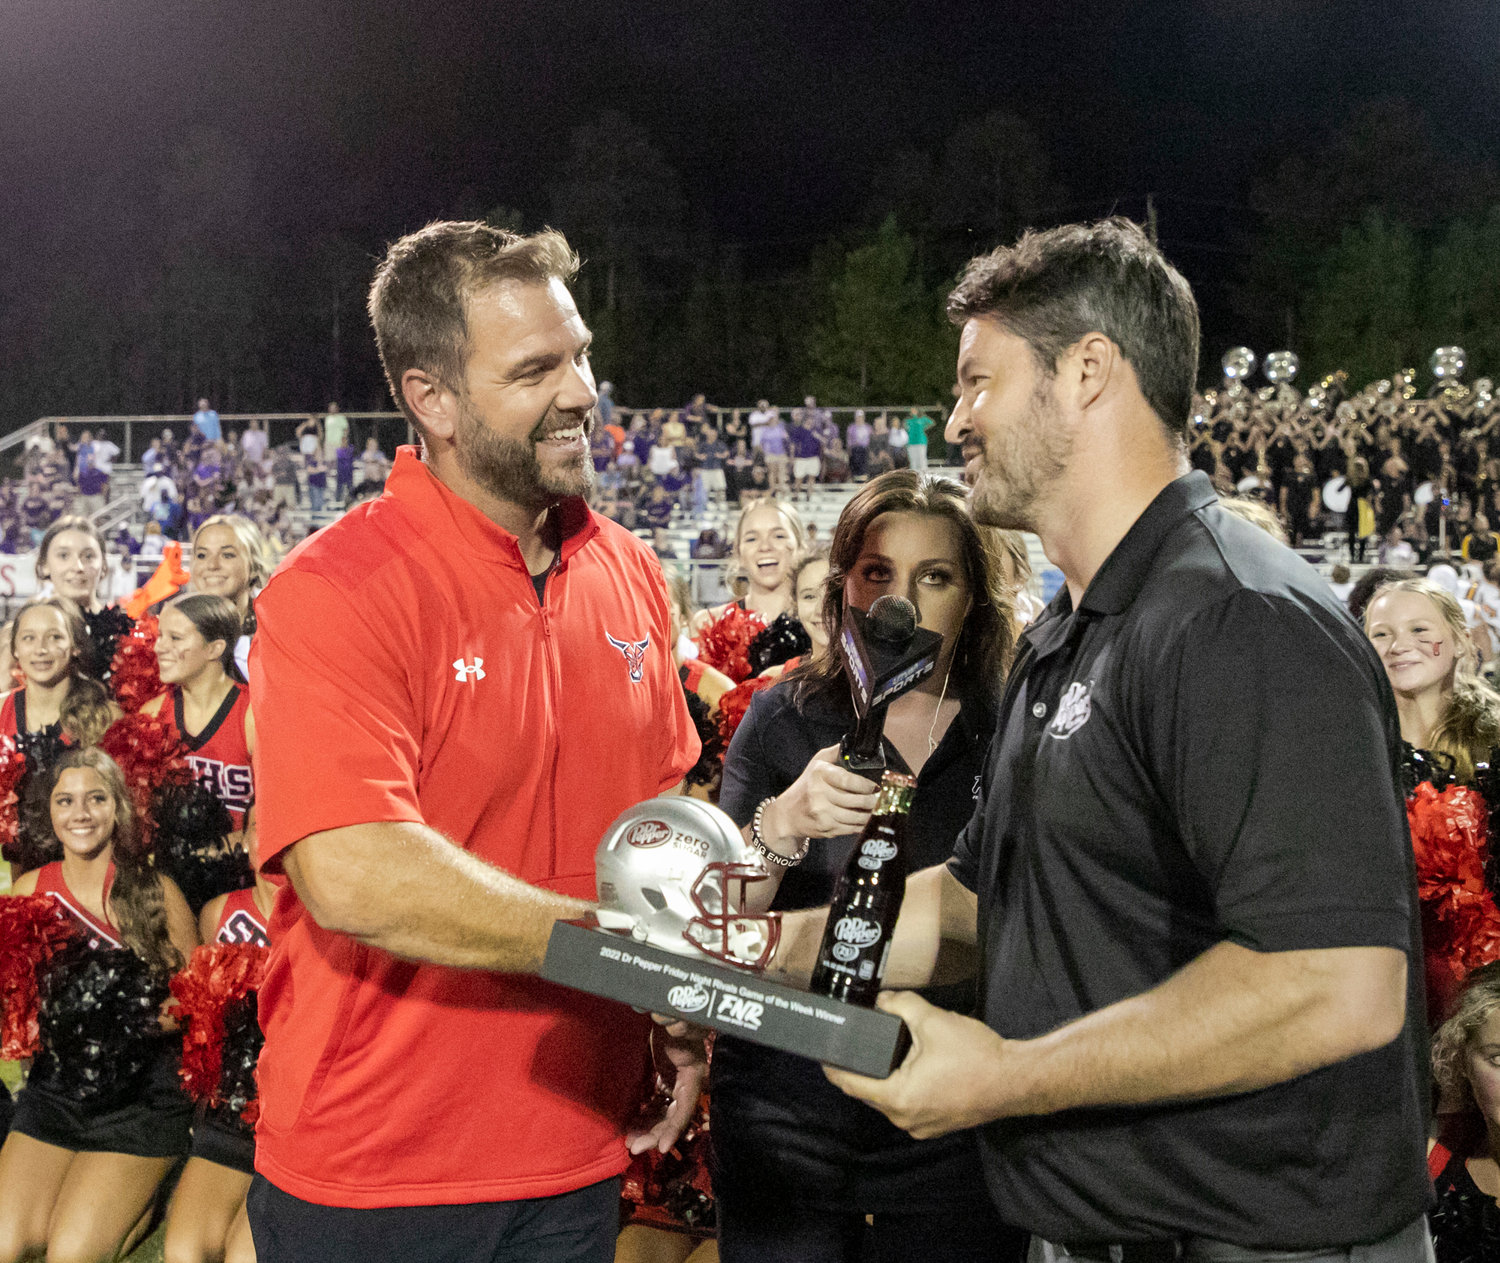 Spanish Fort head coach Chase Smith receives the Dr. Pepper trophy the Toros won for taking down rival Daphne Sept. 23 at home. Smith was named to the AHSAA All-Star coaching staff for the 64th annual game scheduled for Dec. 16 in Mobile.